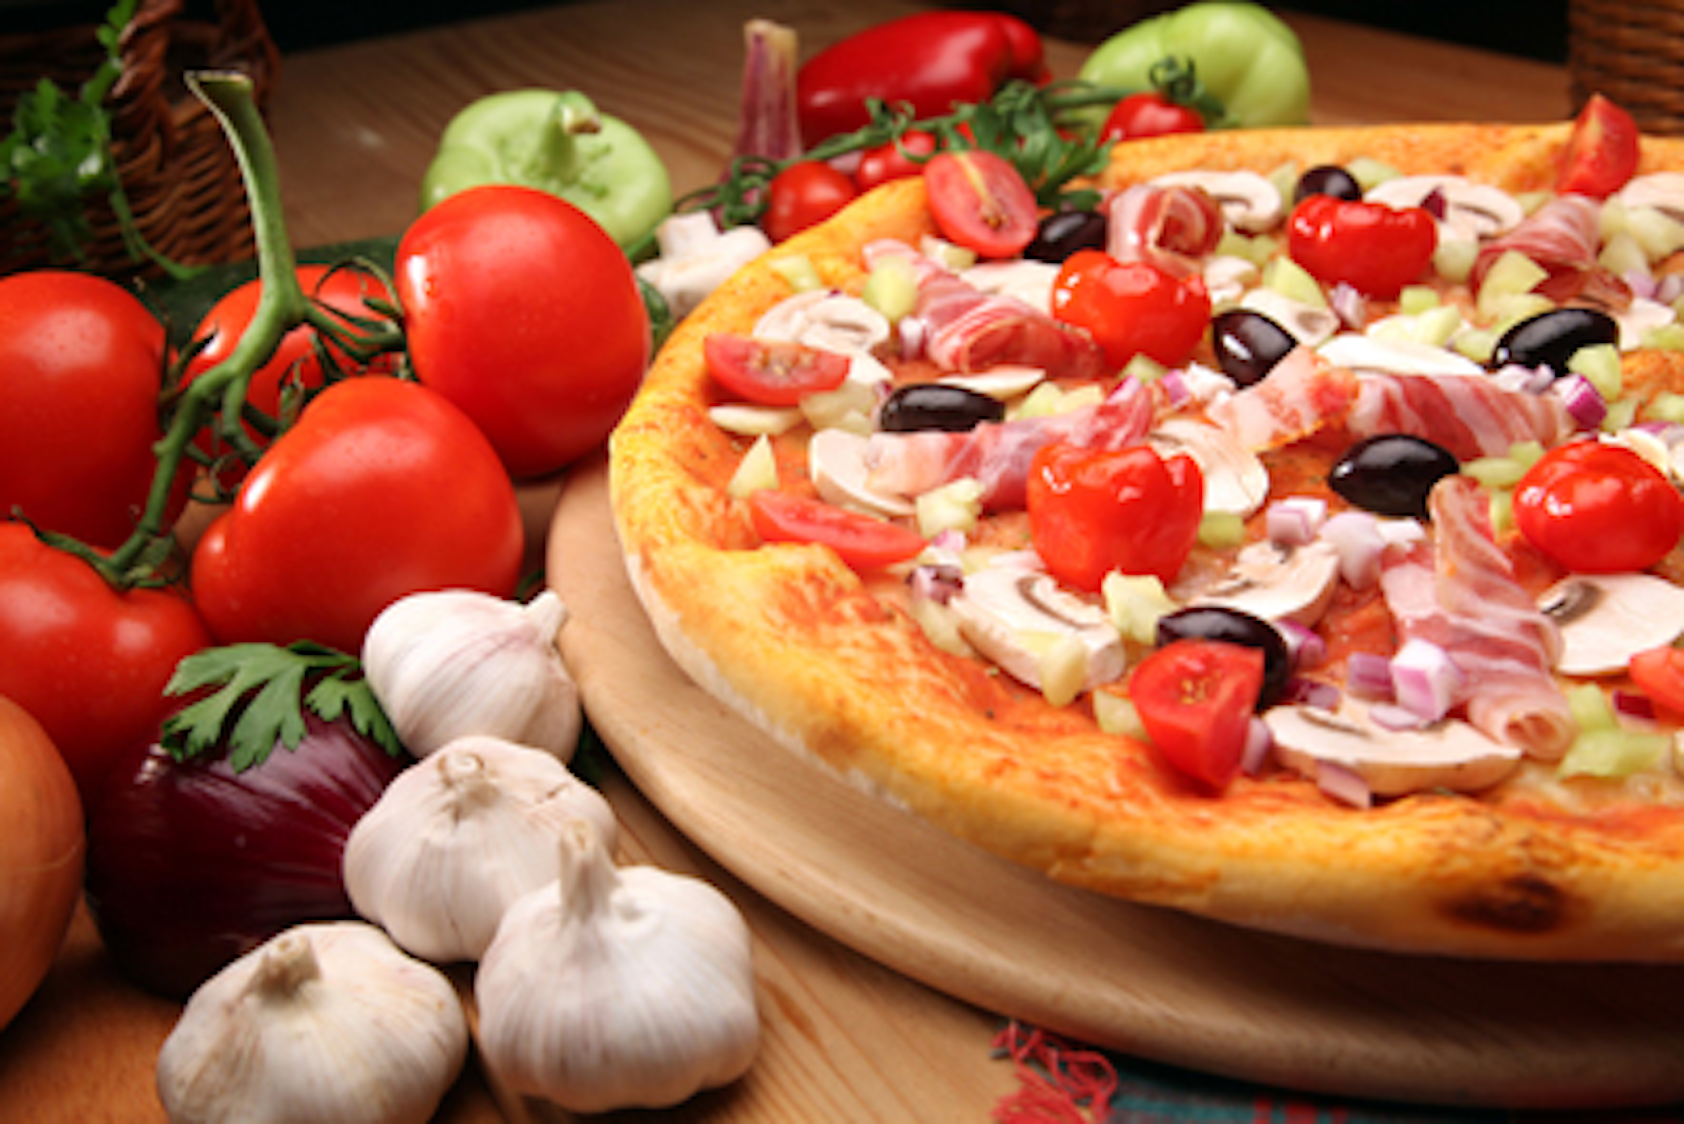 Can pizza be good for oral health? | Dentistry IQ